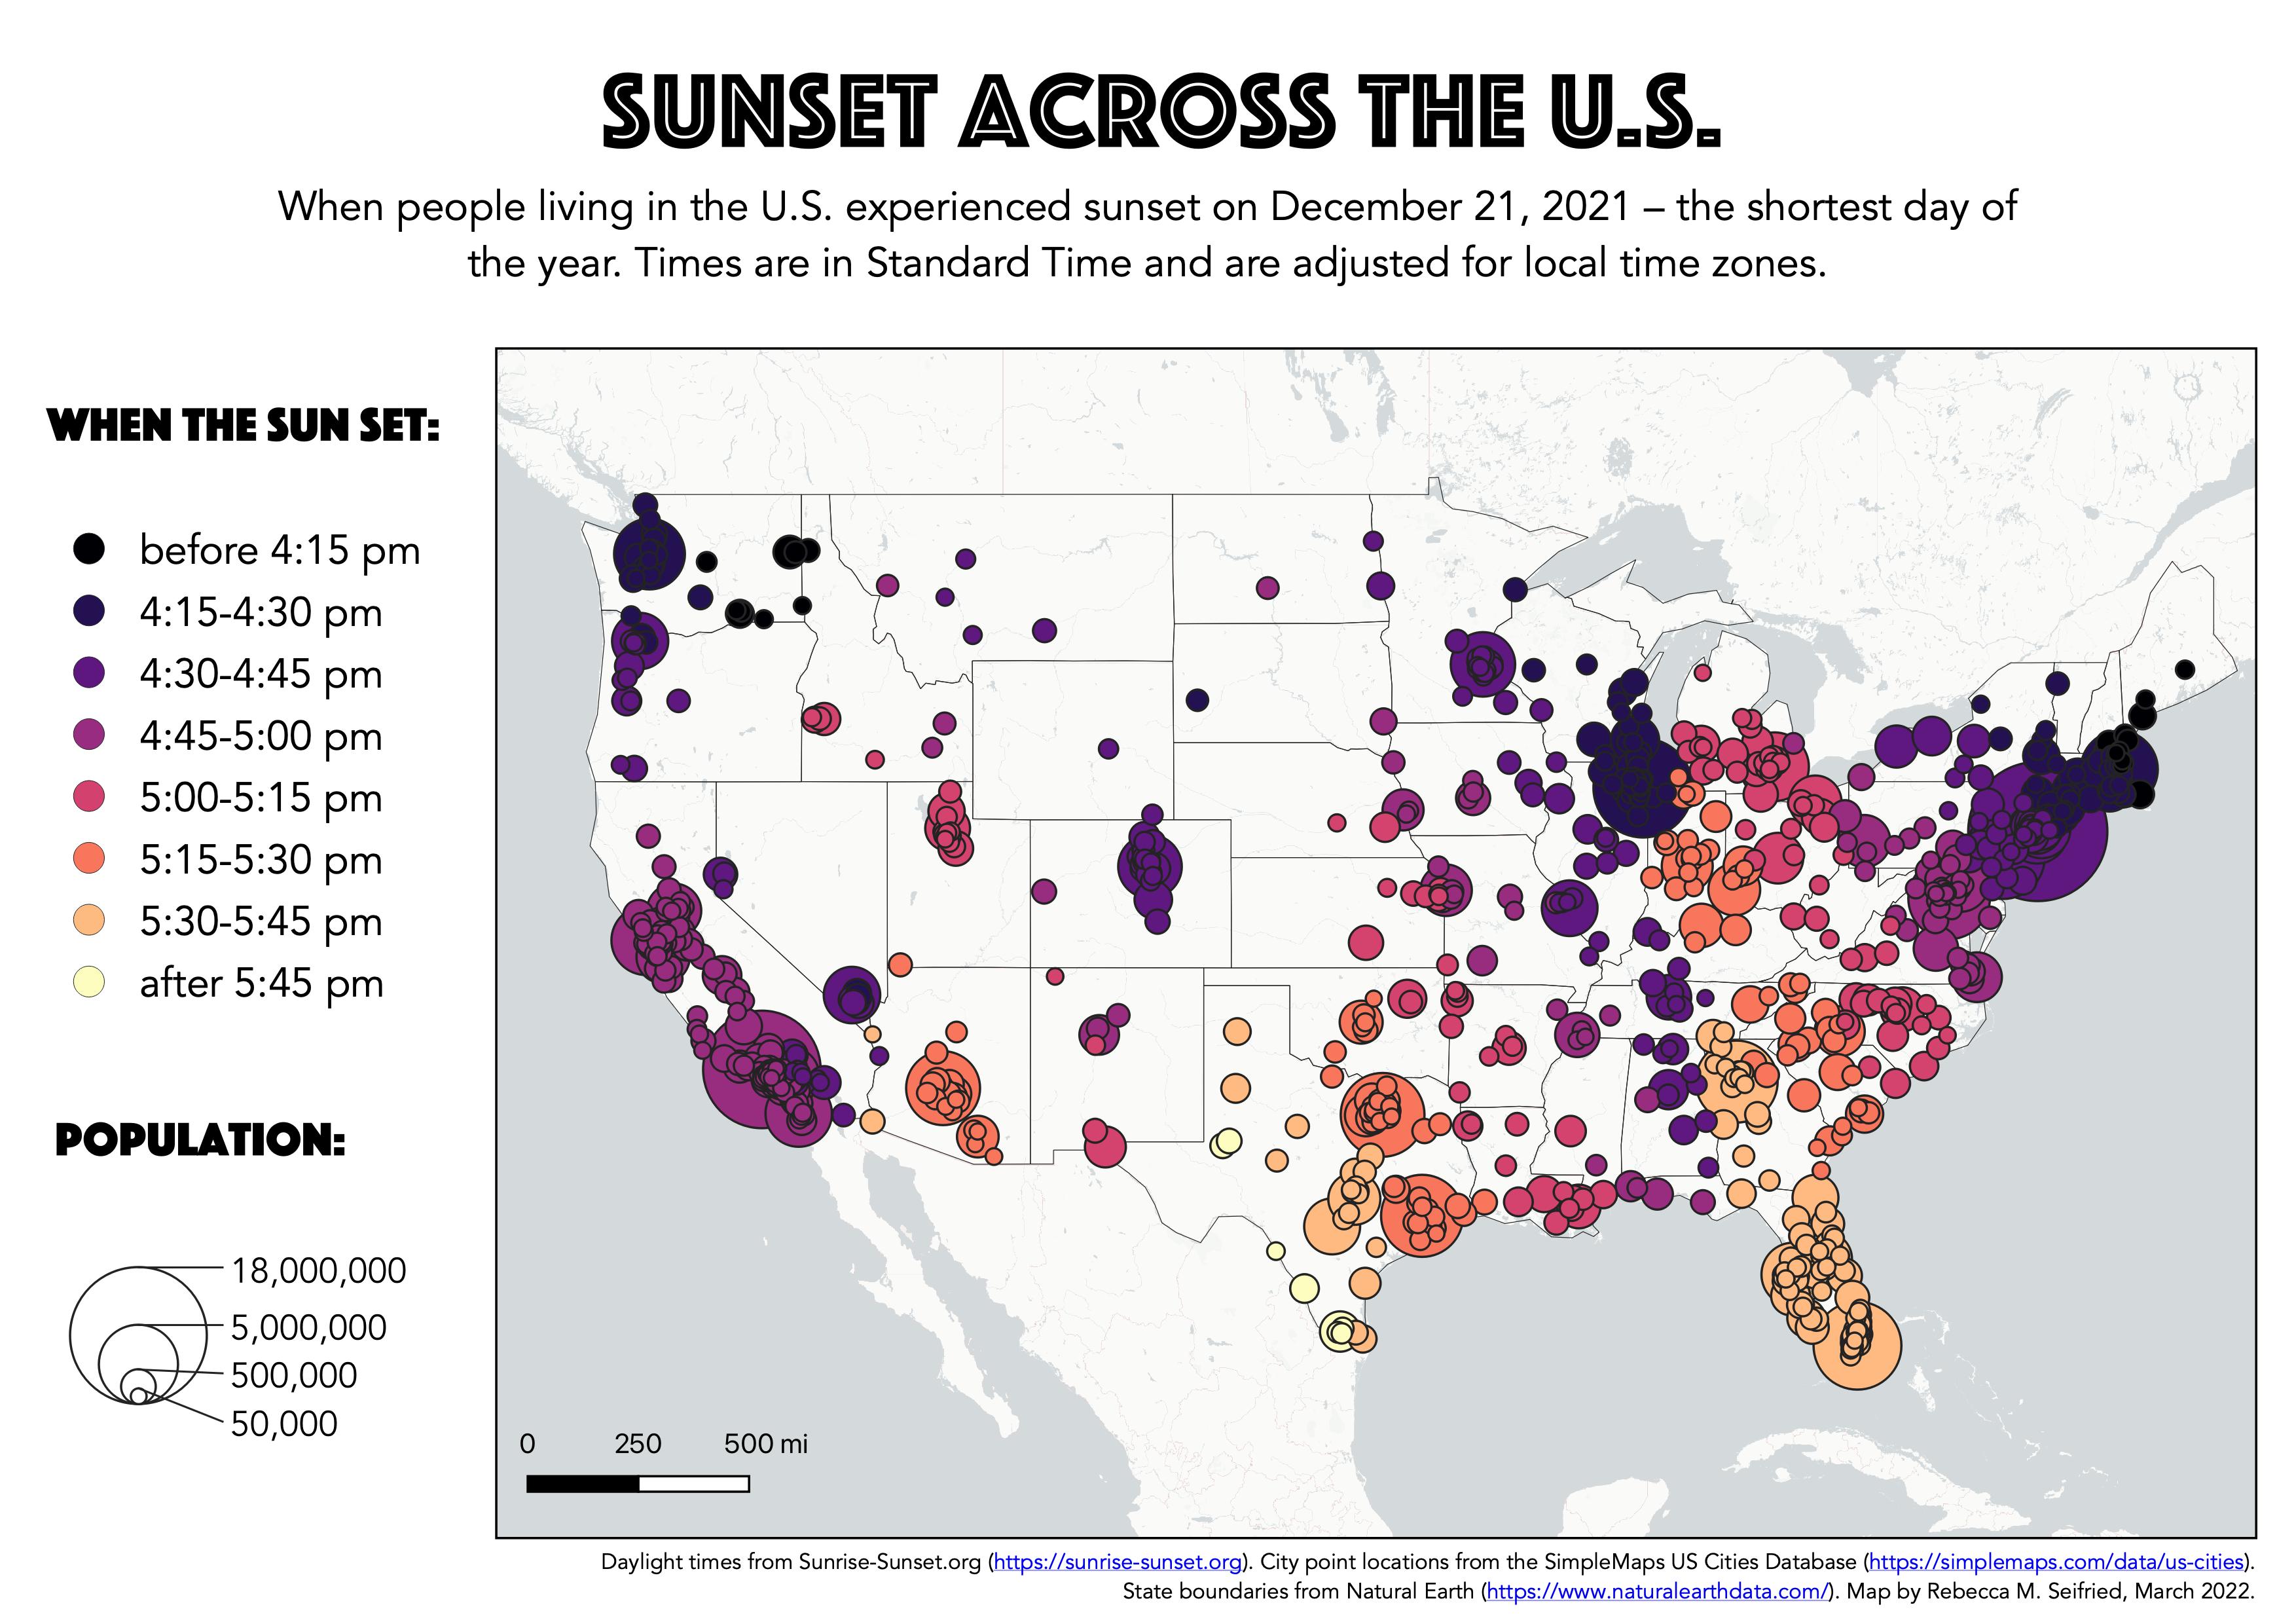 Map of sunset times in the U.S.